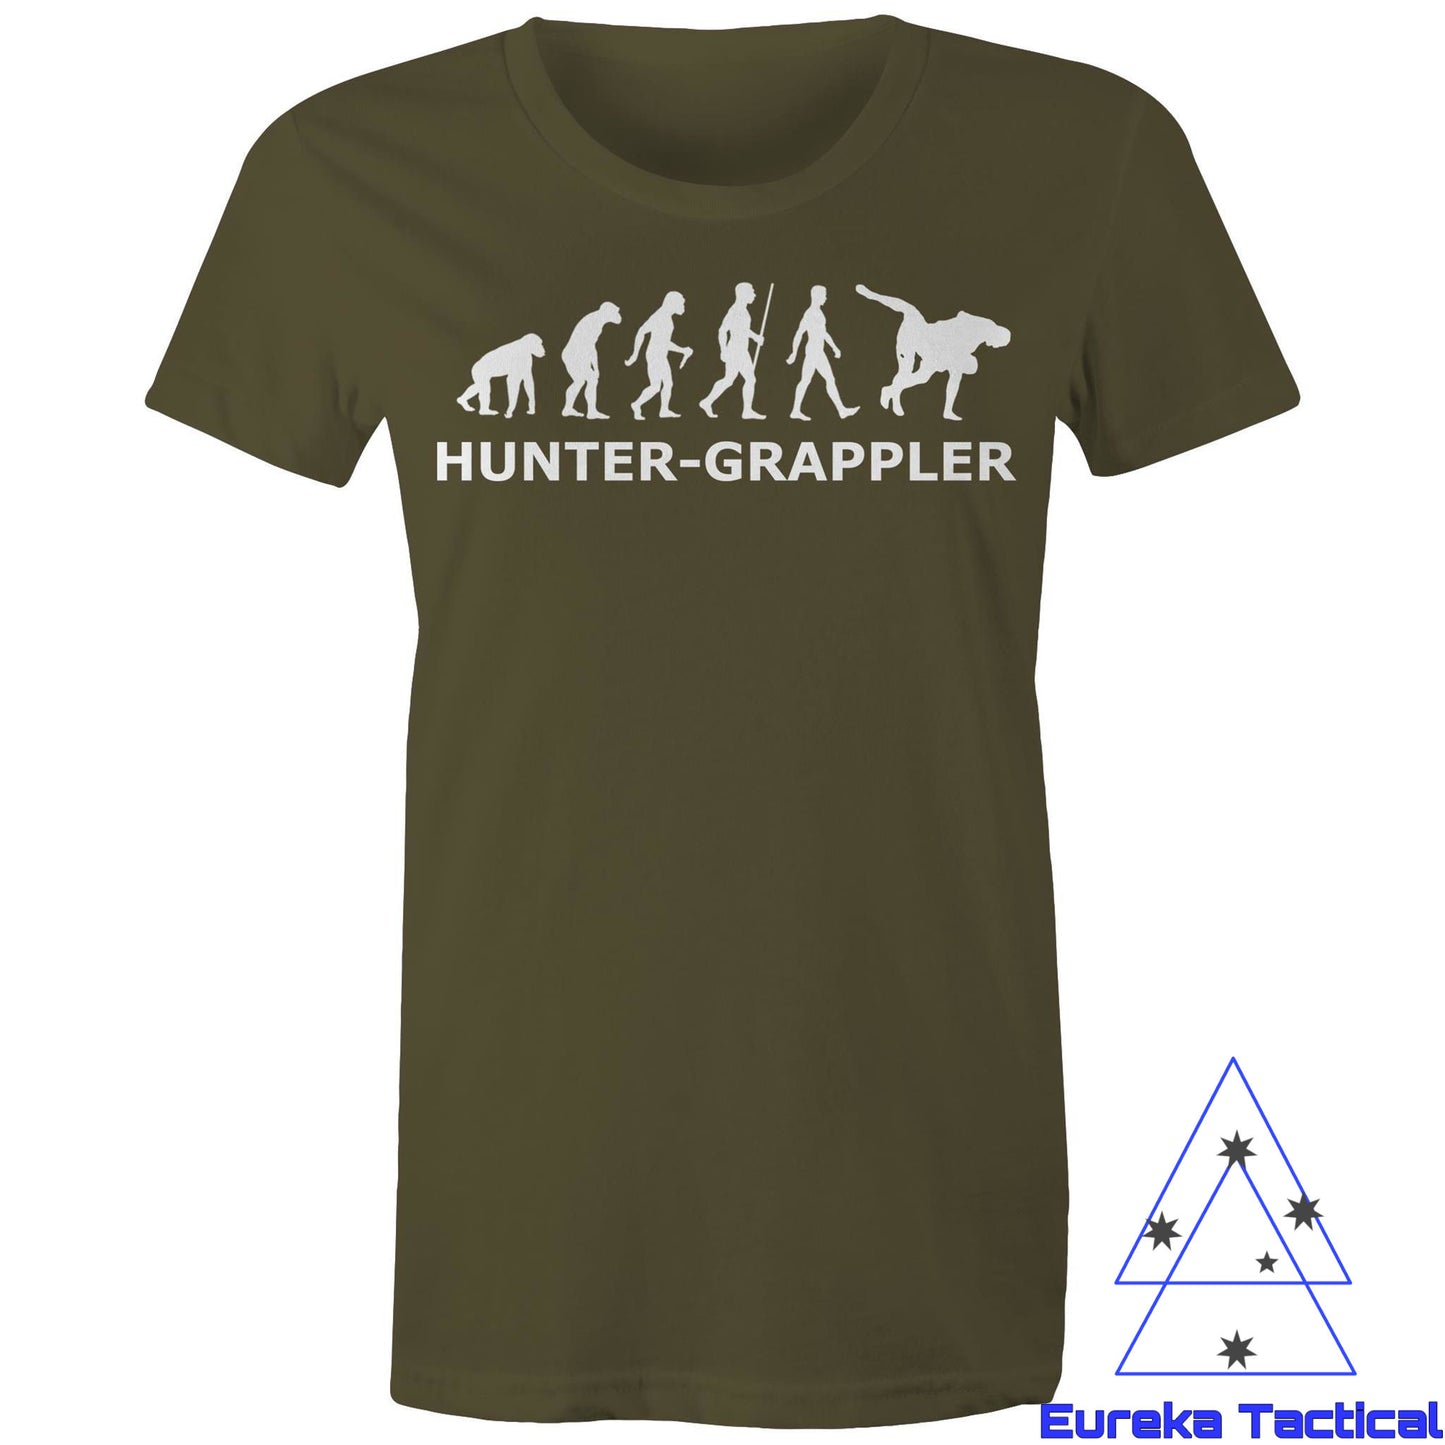 Hunter-Grappler. AS Color 100% cotton womens maple tee.